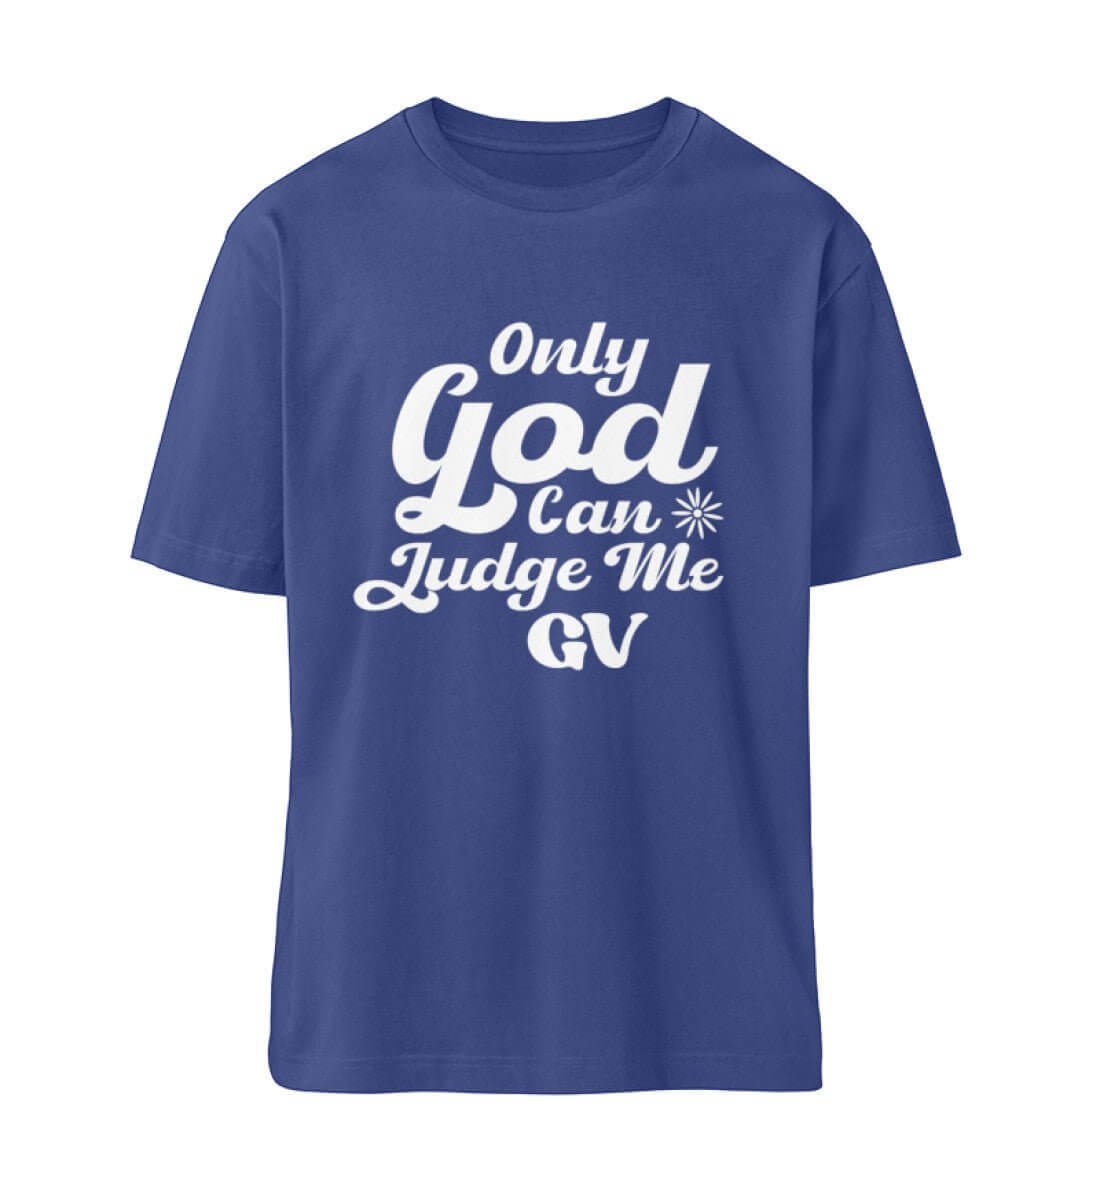 'ONLY GOD CAN JUGDE ME' - Fuser Relaxed Shirt ST/ST - GODVIBES